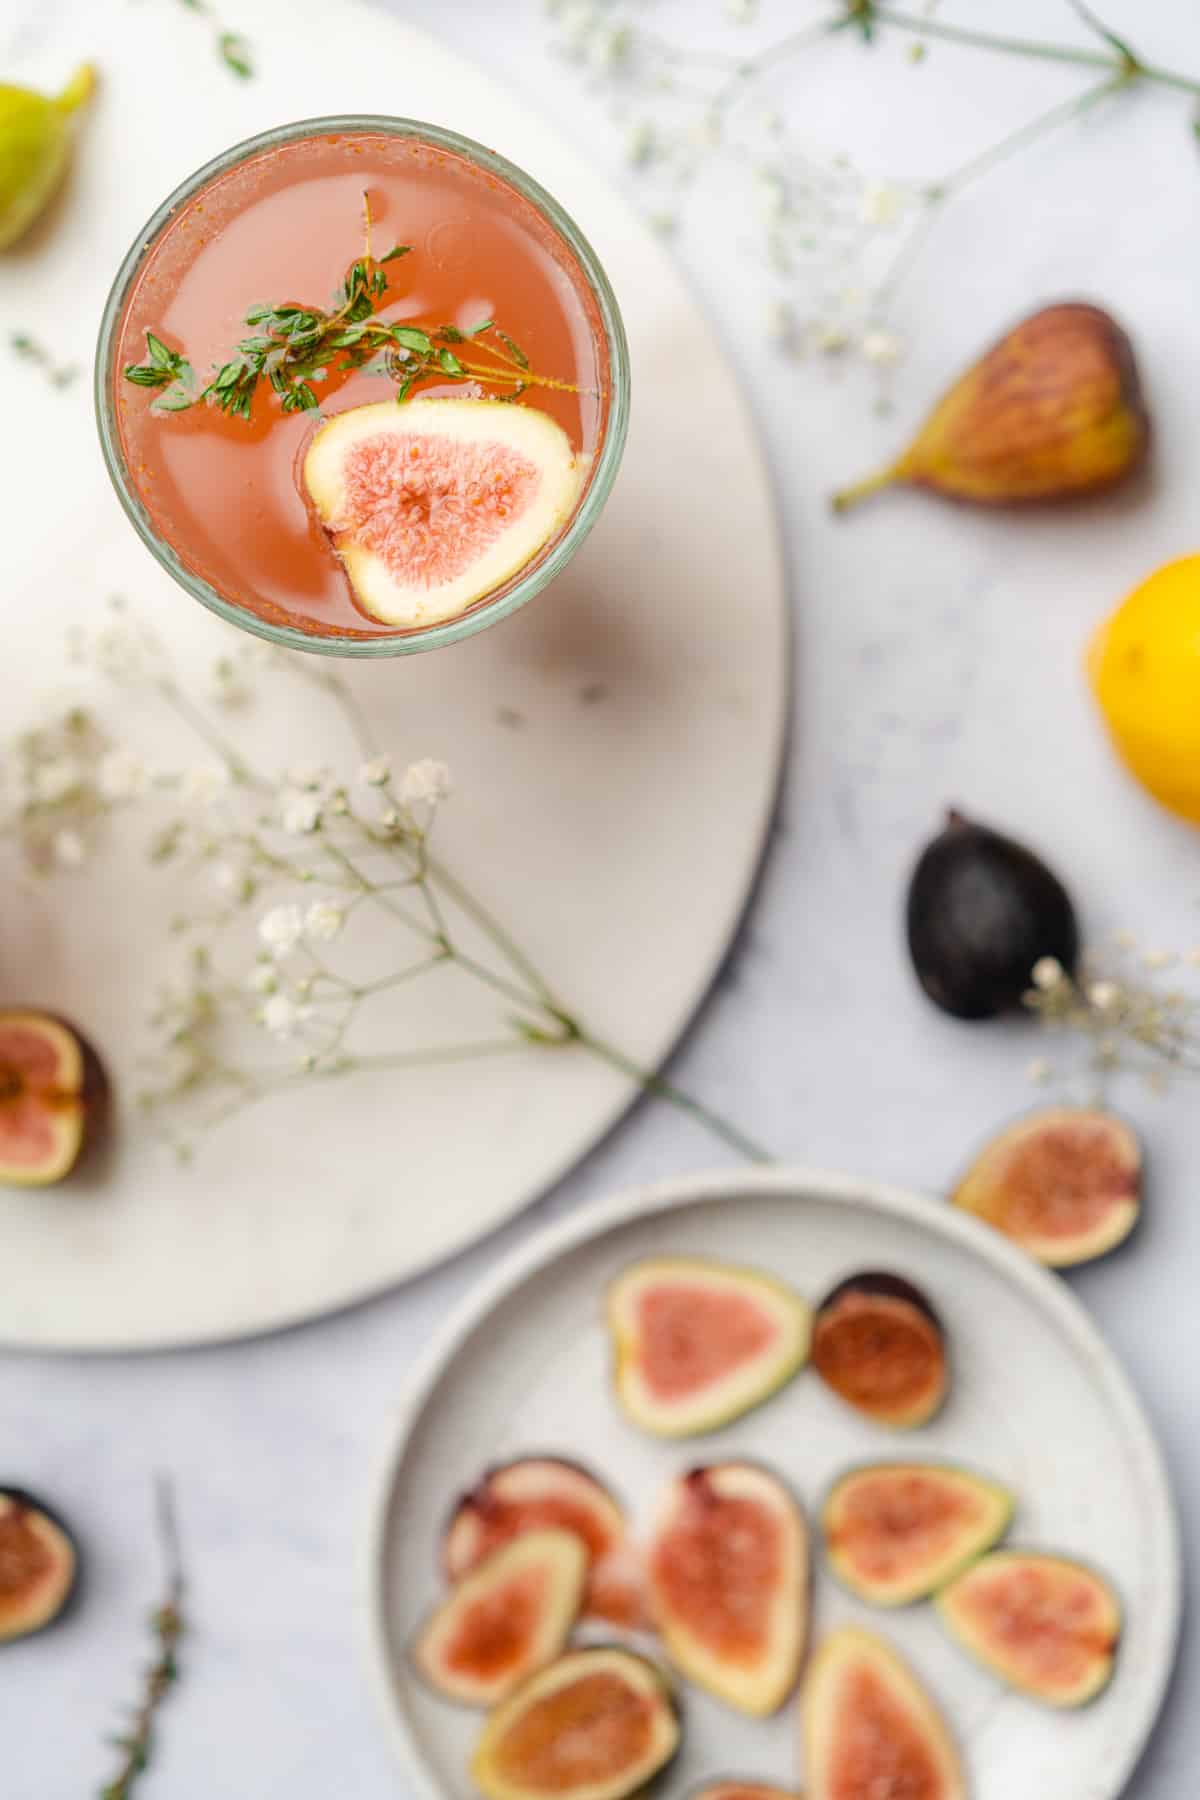 gorgeous fig cocktail with fresh figs and baby's breath flowers surrounding the glass